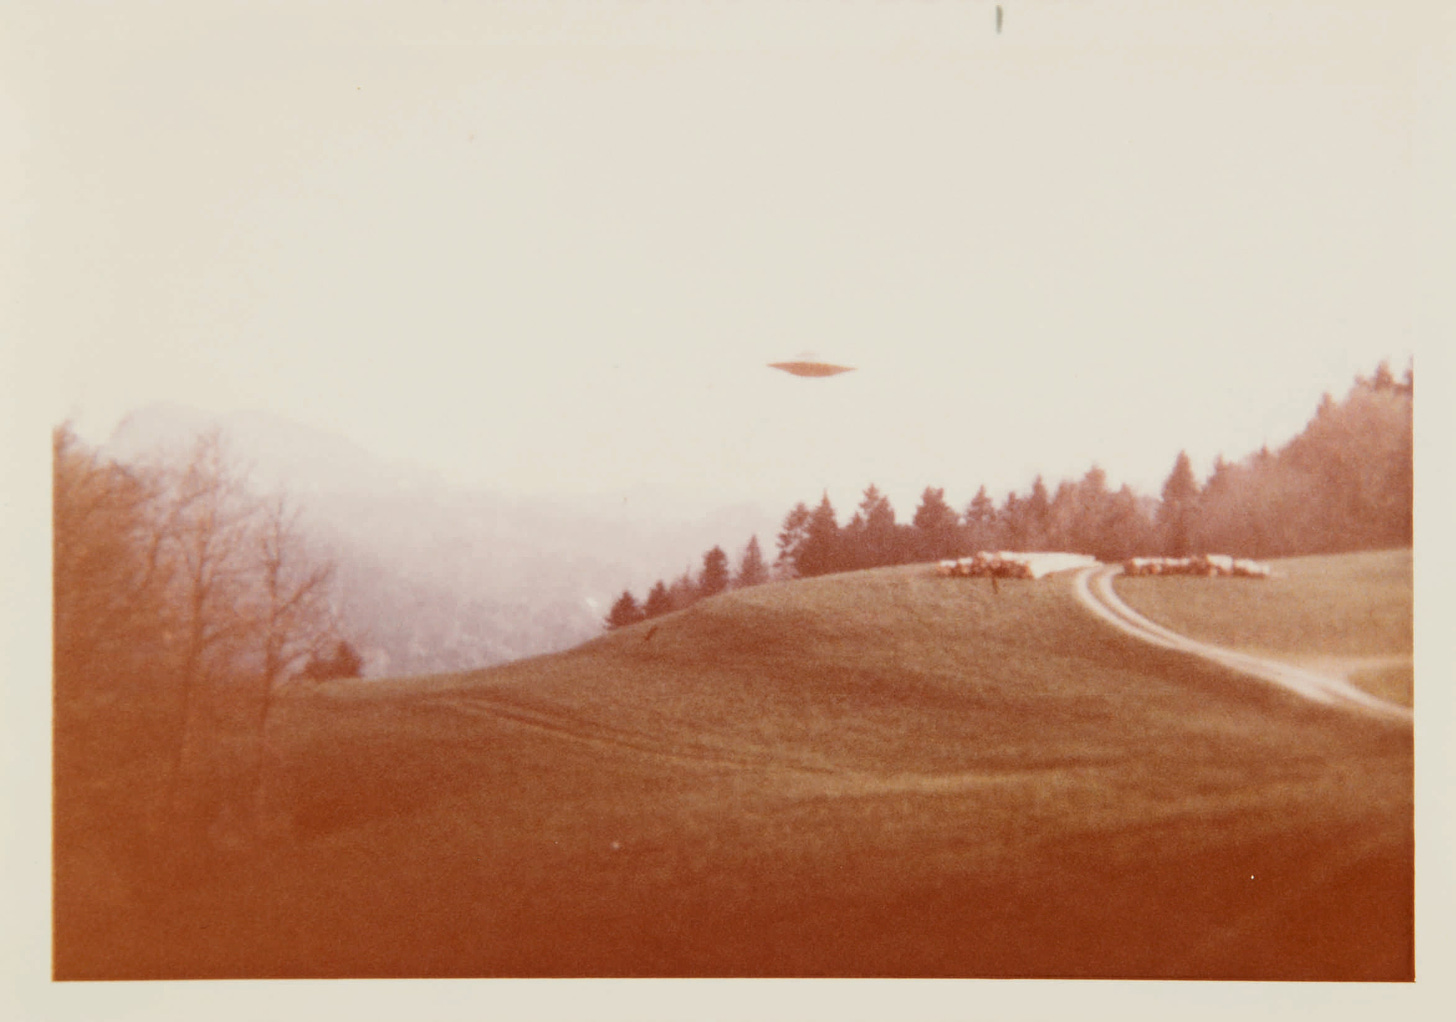 UFO photos made famous by 'The X-Files' surface, up for auction